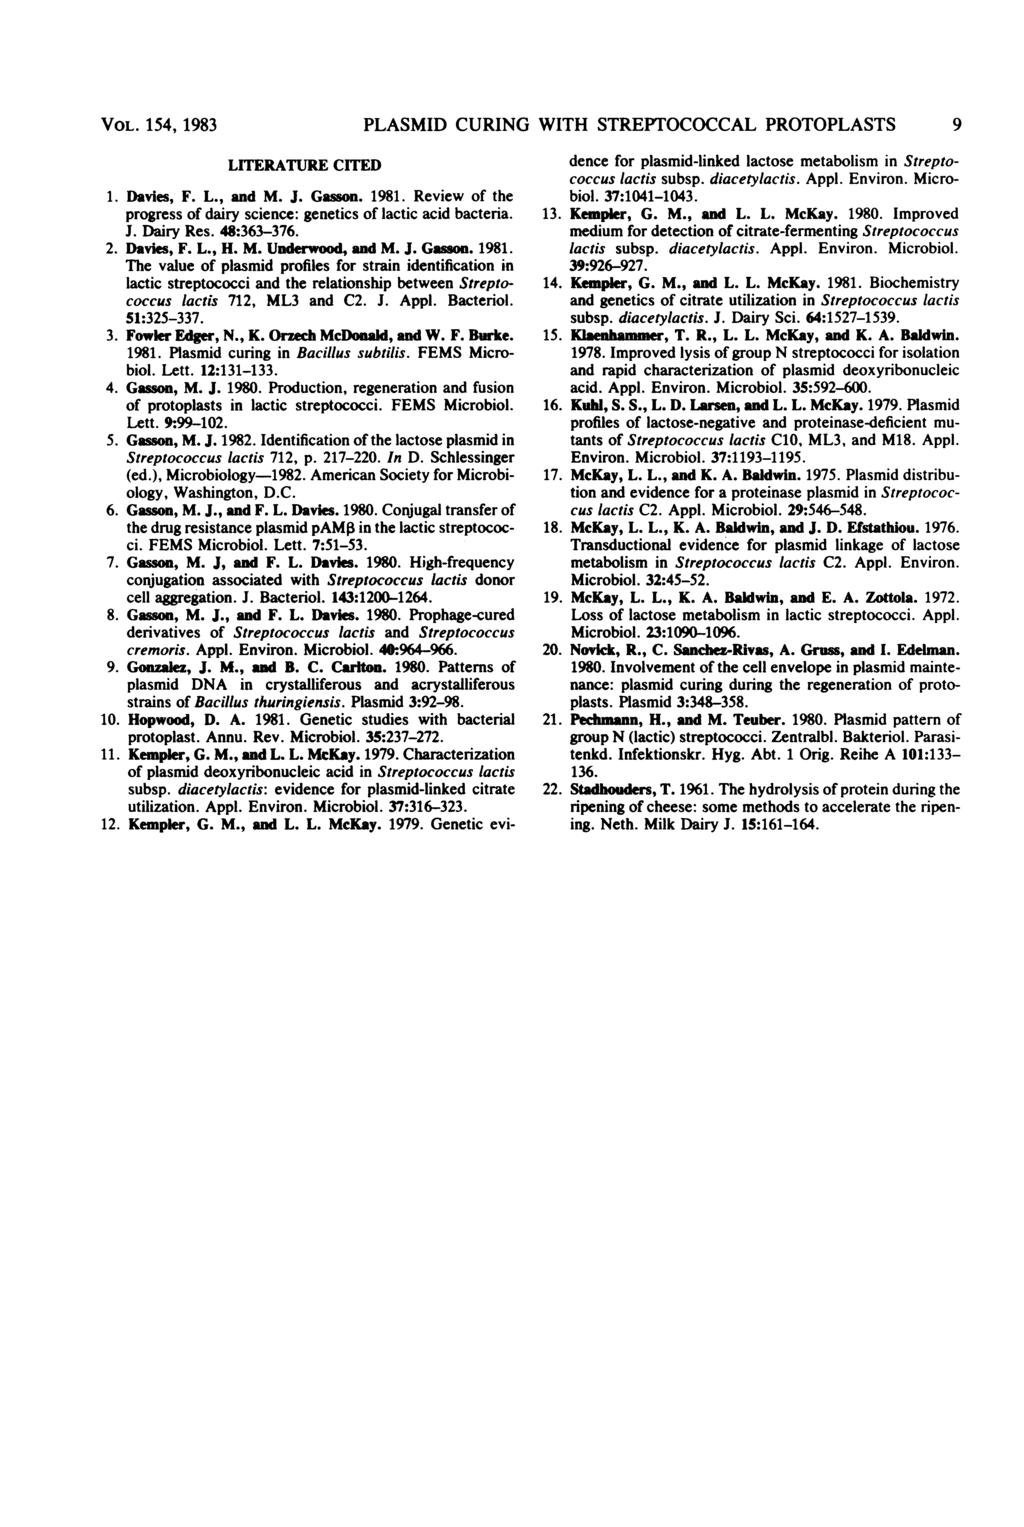 VOL. 154, 1983 PLASMID CURING WITH STREPTOCOCCAL PROTOPLASTS 9 LITERATURE CITED 1. Davies, F. L., and M. J. Gasson. 1981. Review of the progress of dairy science: genetics of lactic acid bacteria. J. Dairy Res.